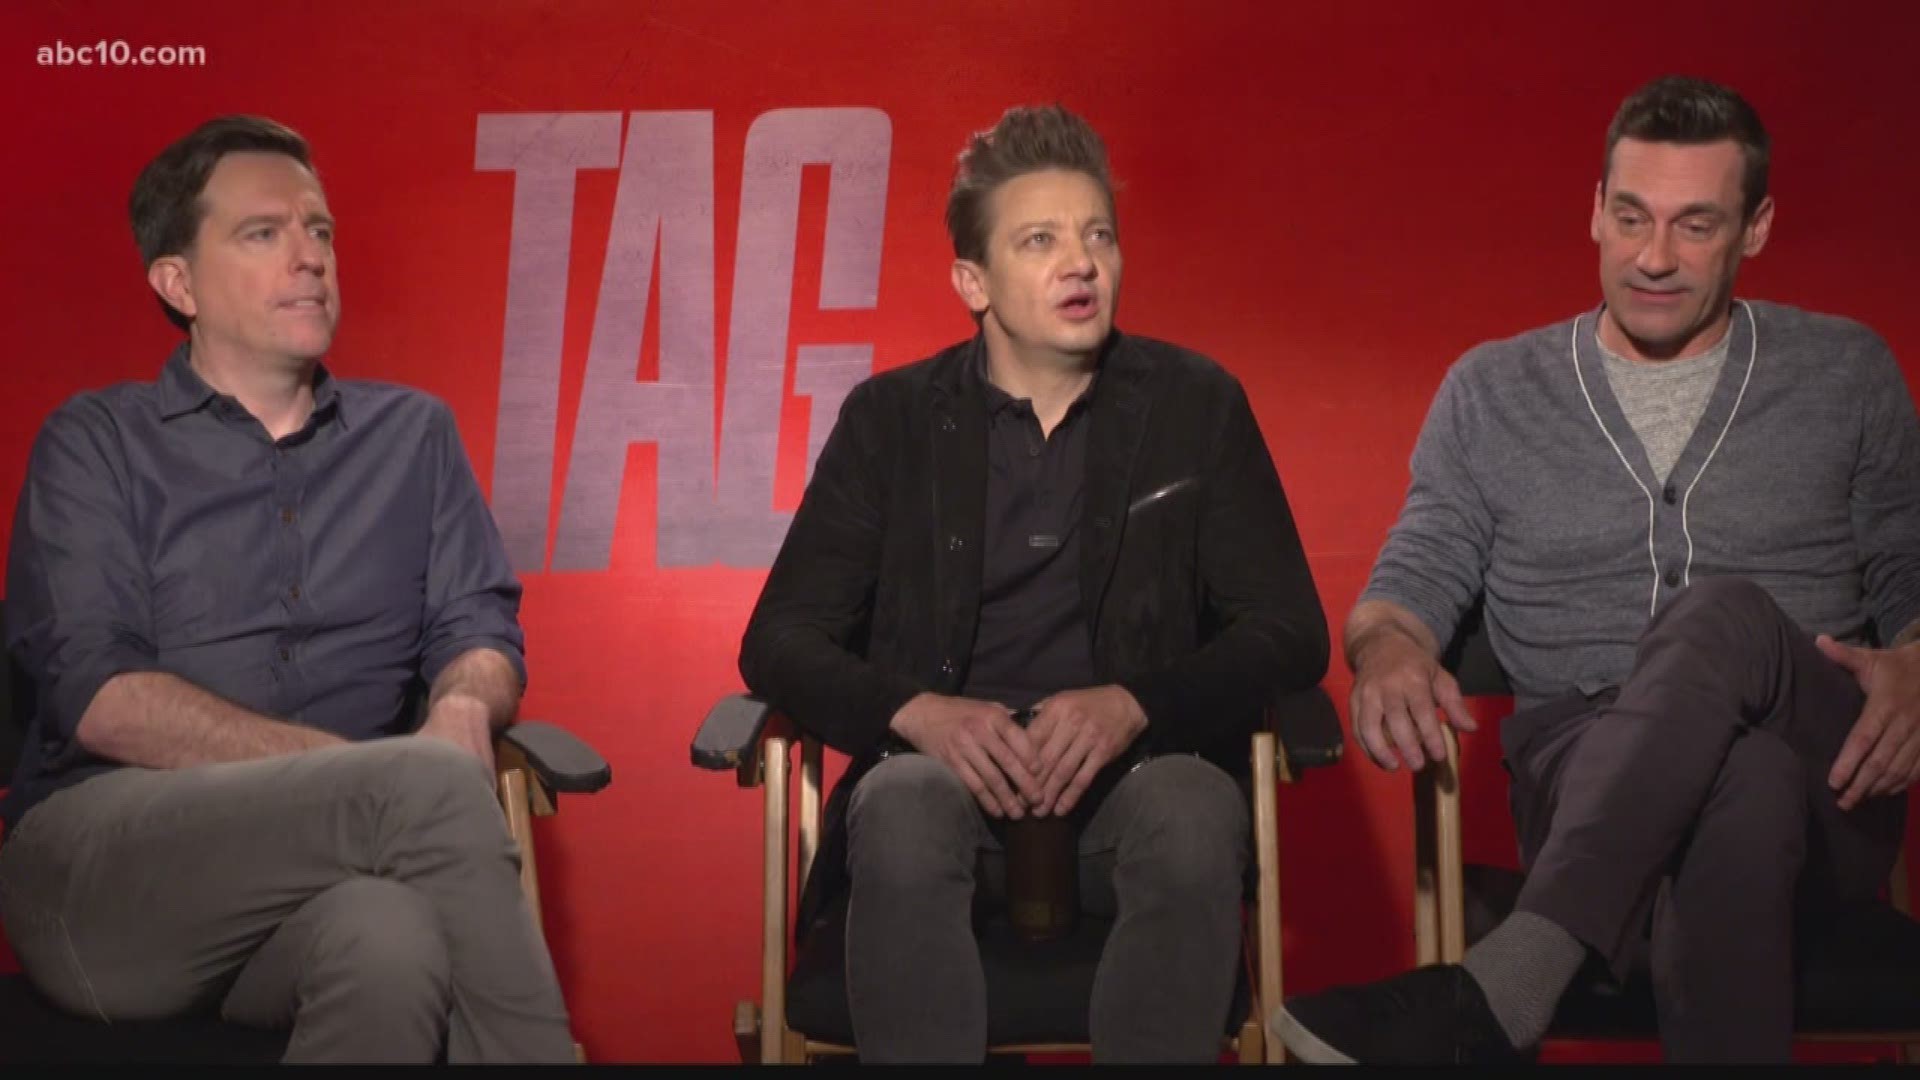 Mark S. Allen sat down with the stars of the new summer comedy "Tag."